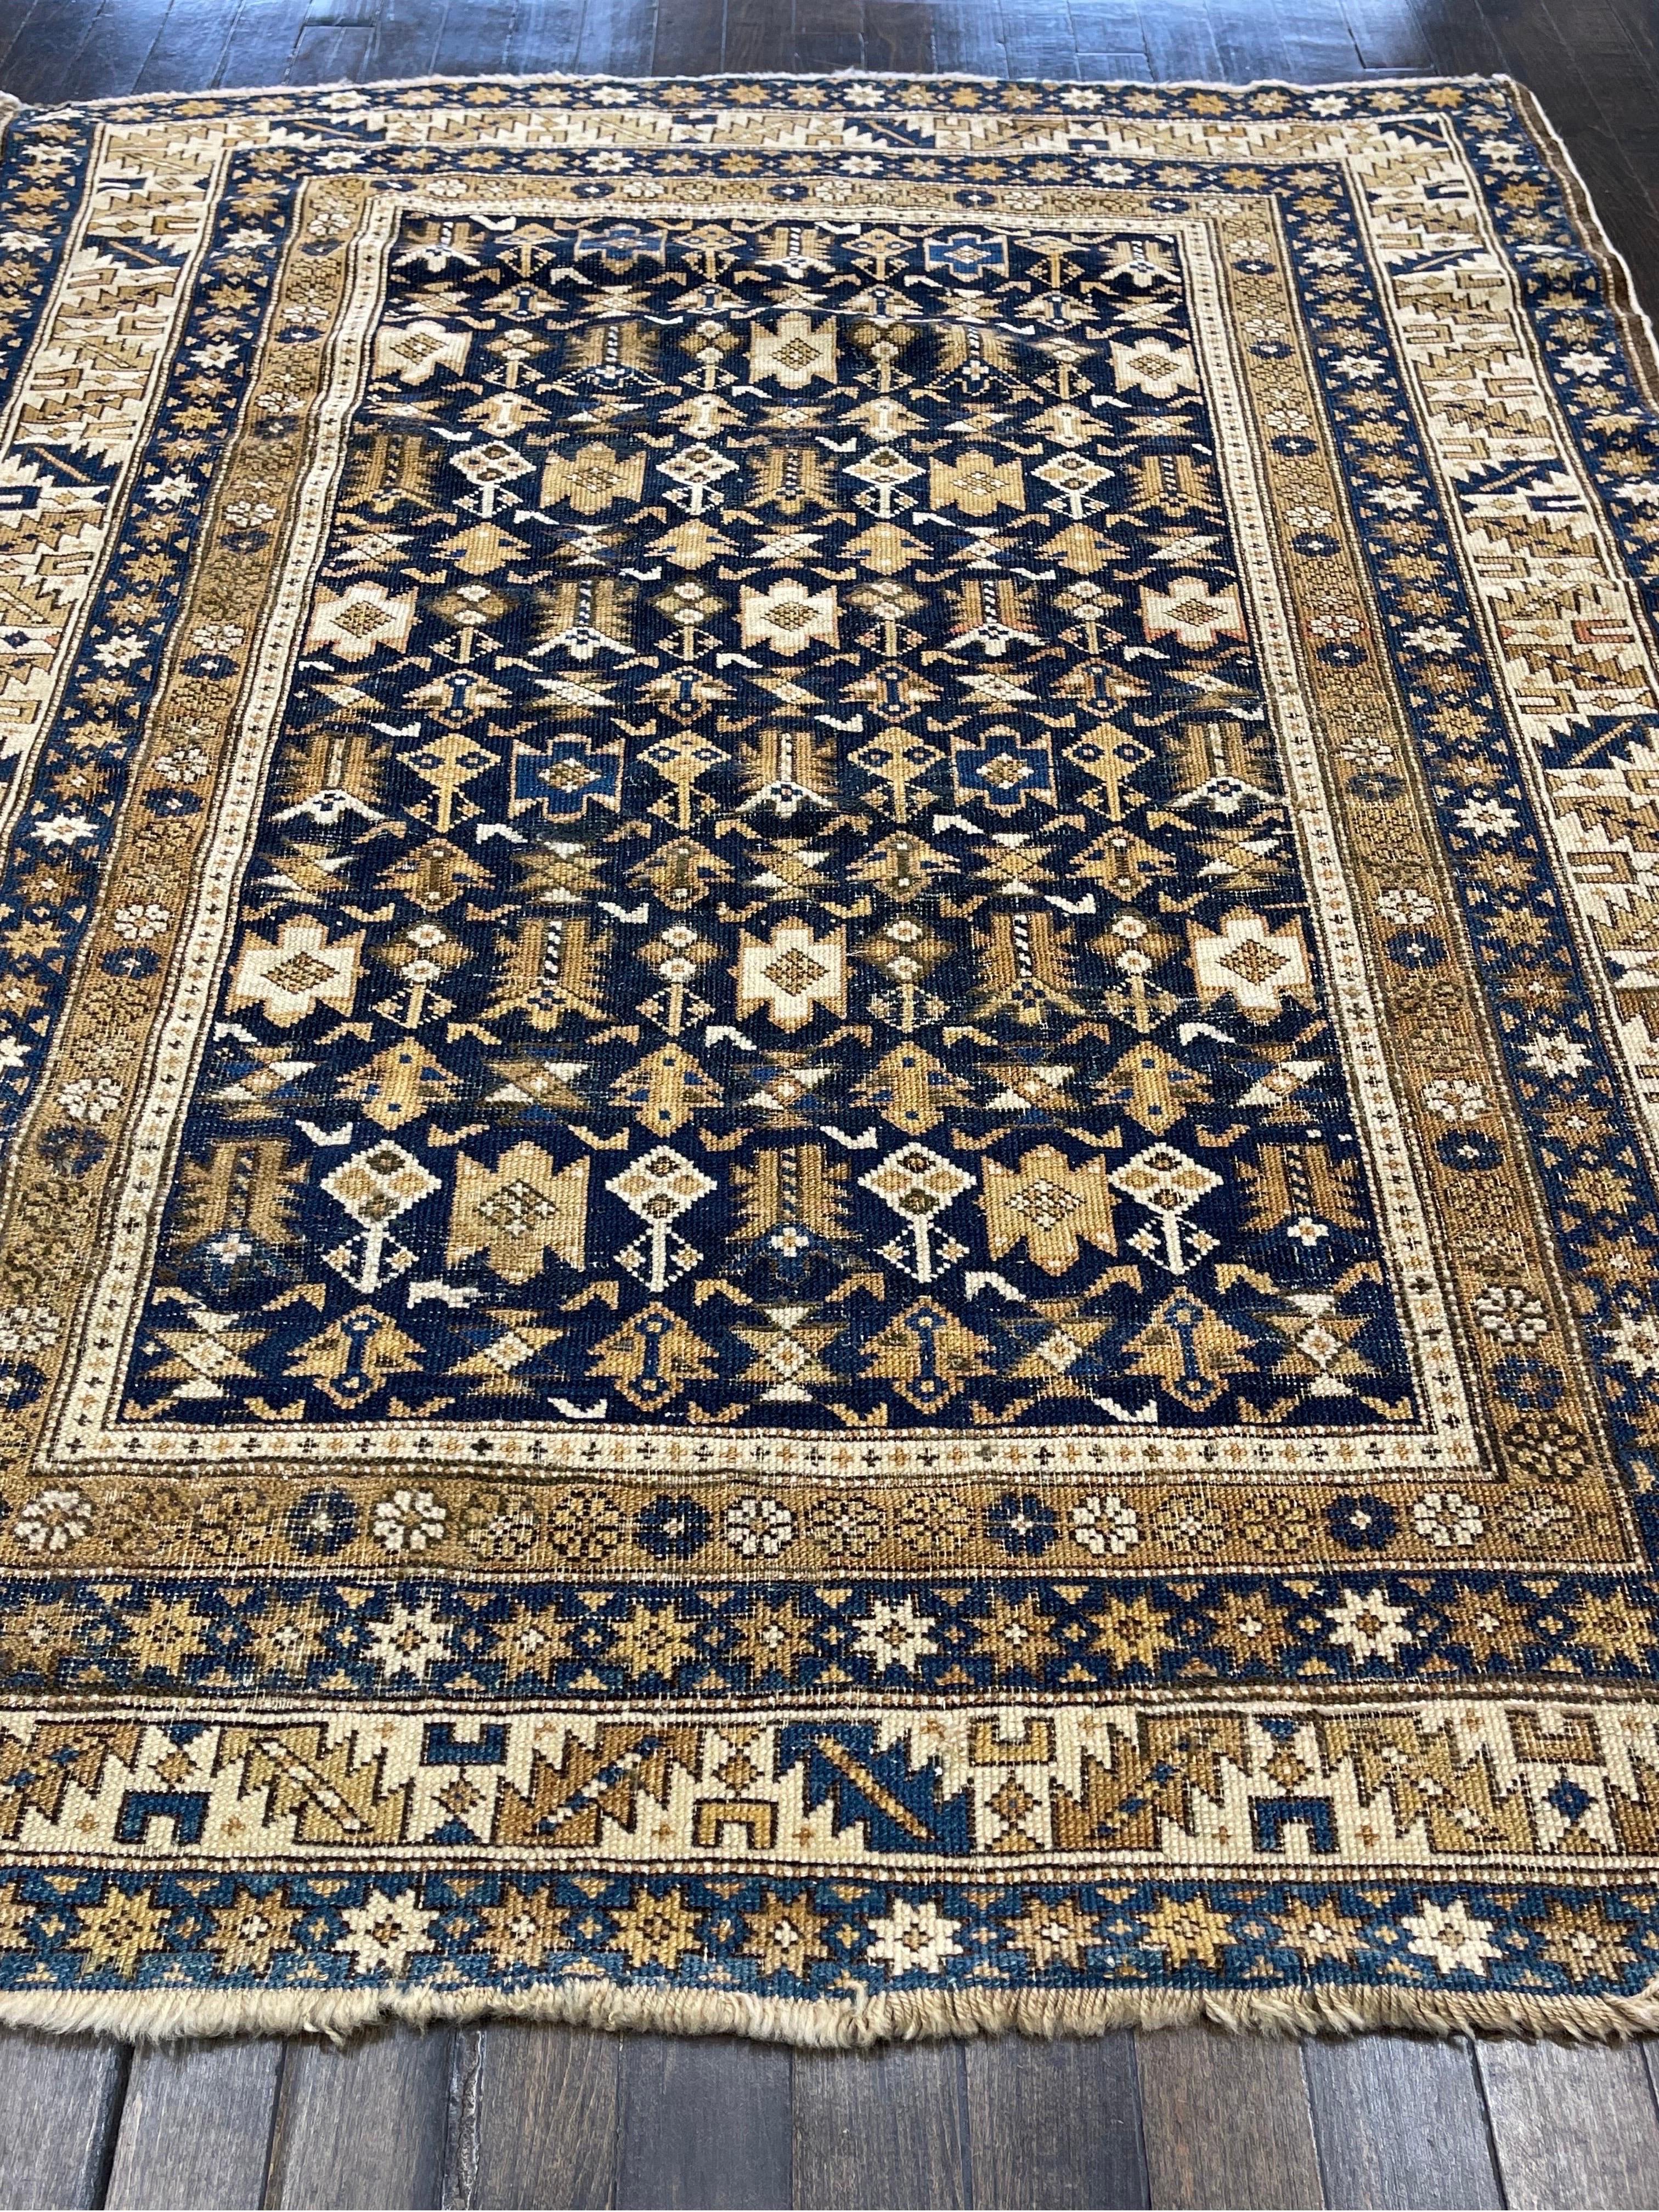 Extremely tight knotted carpet,this rug was made in the town of Shirvan located in the caucasus mountains.The field has shrub- like flowers arranged with a lattice on an indigo blue ground.

The very unusual six guard borders frame the rug nicely